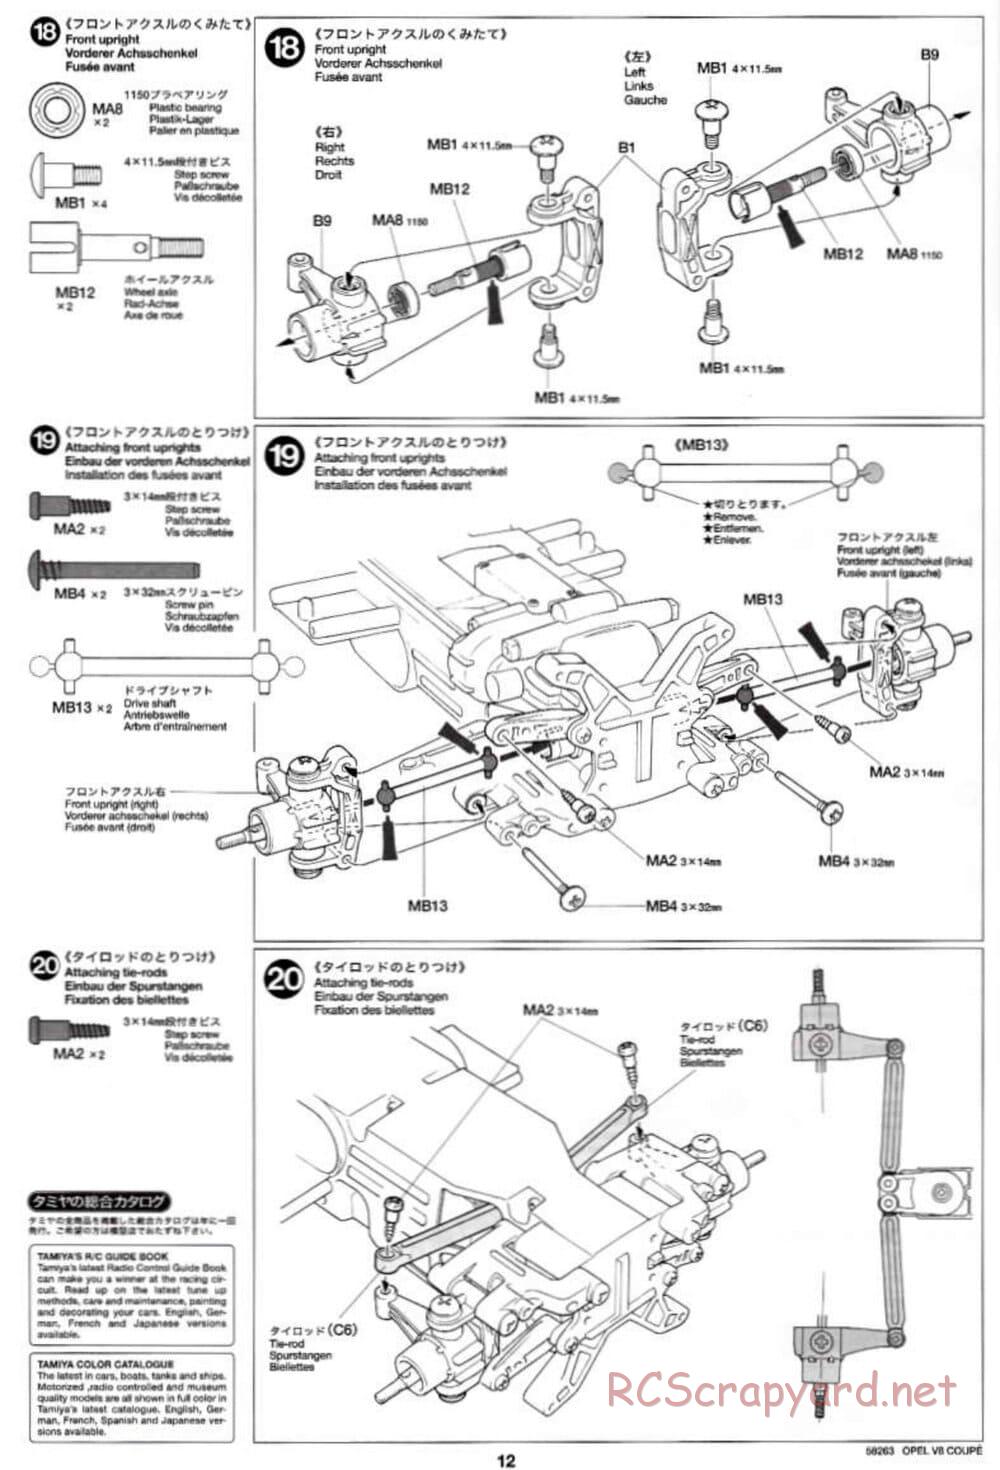 Tamiya - Opel V8 Coupe - TL-01 Chassis - Manual - Page 12